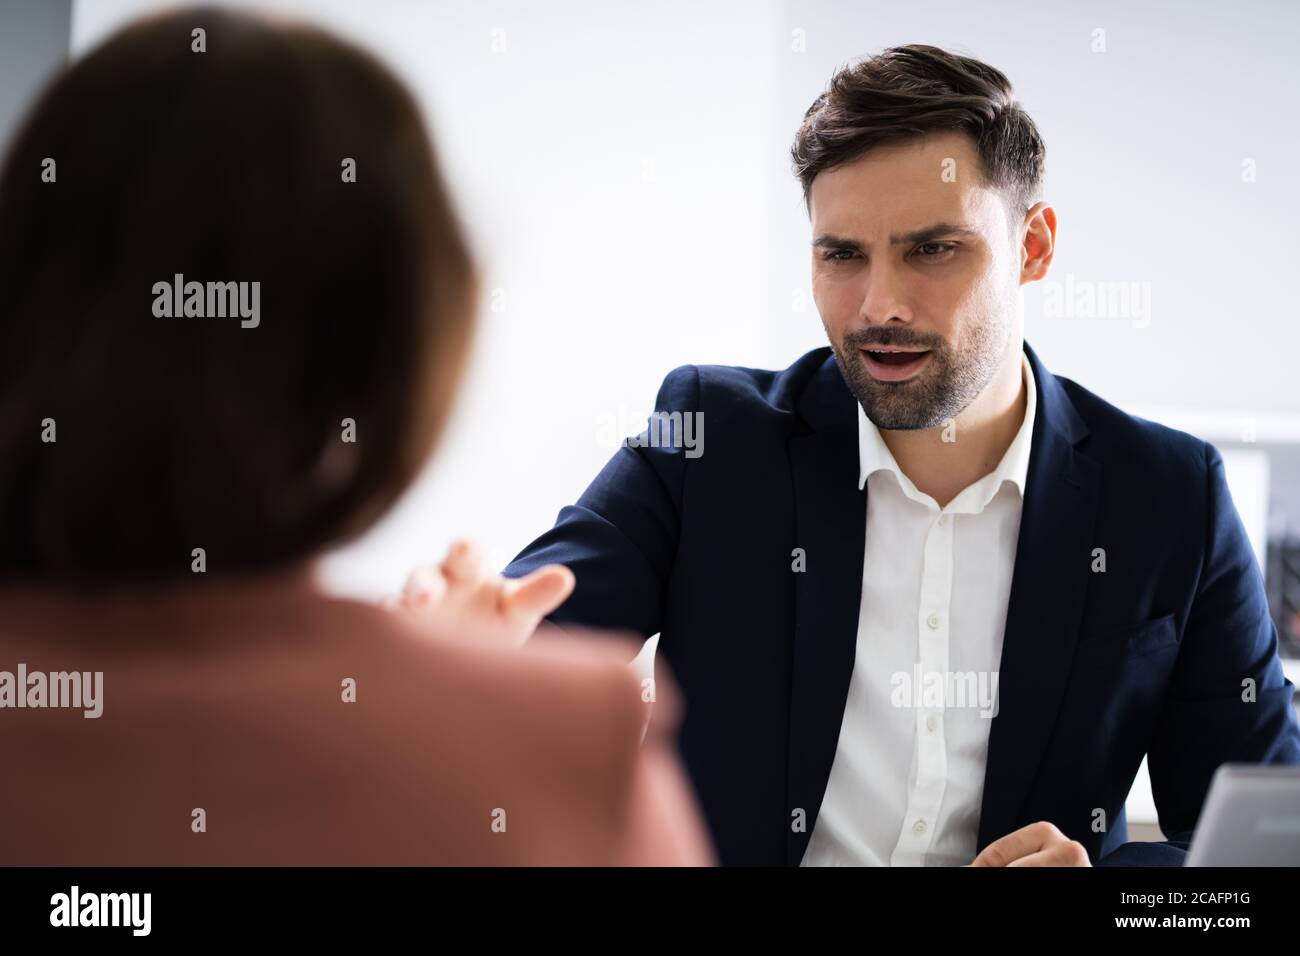 Angry Employer Bullying Unhappy Stressed Professional Employee Stock Photo